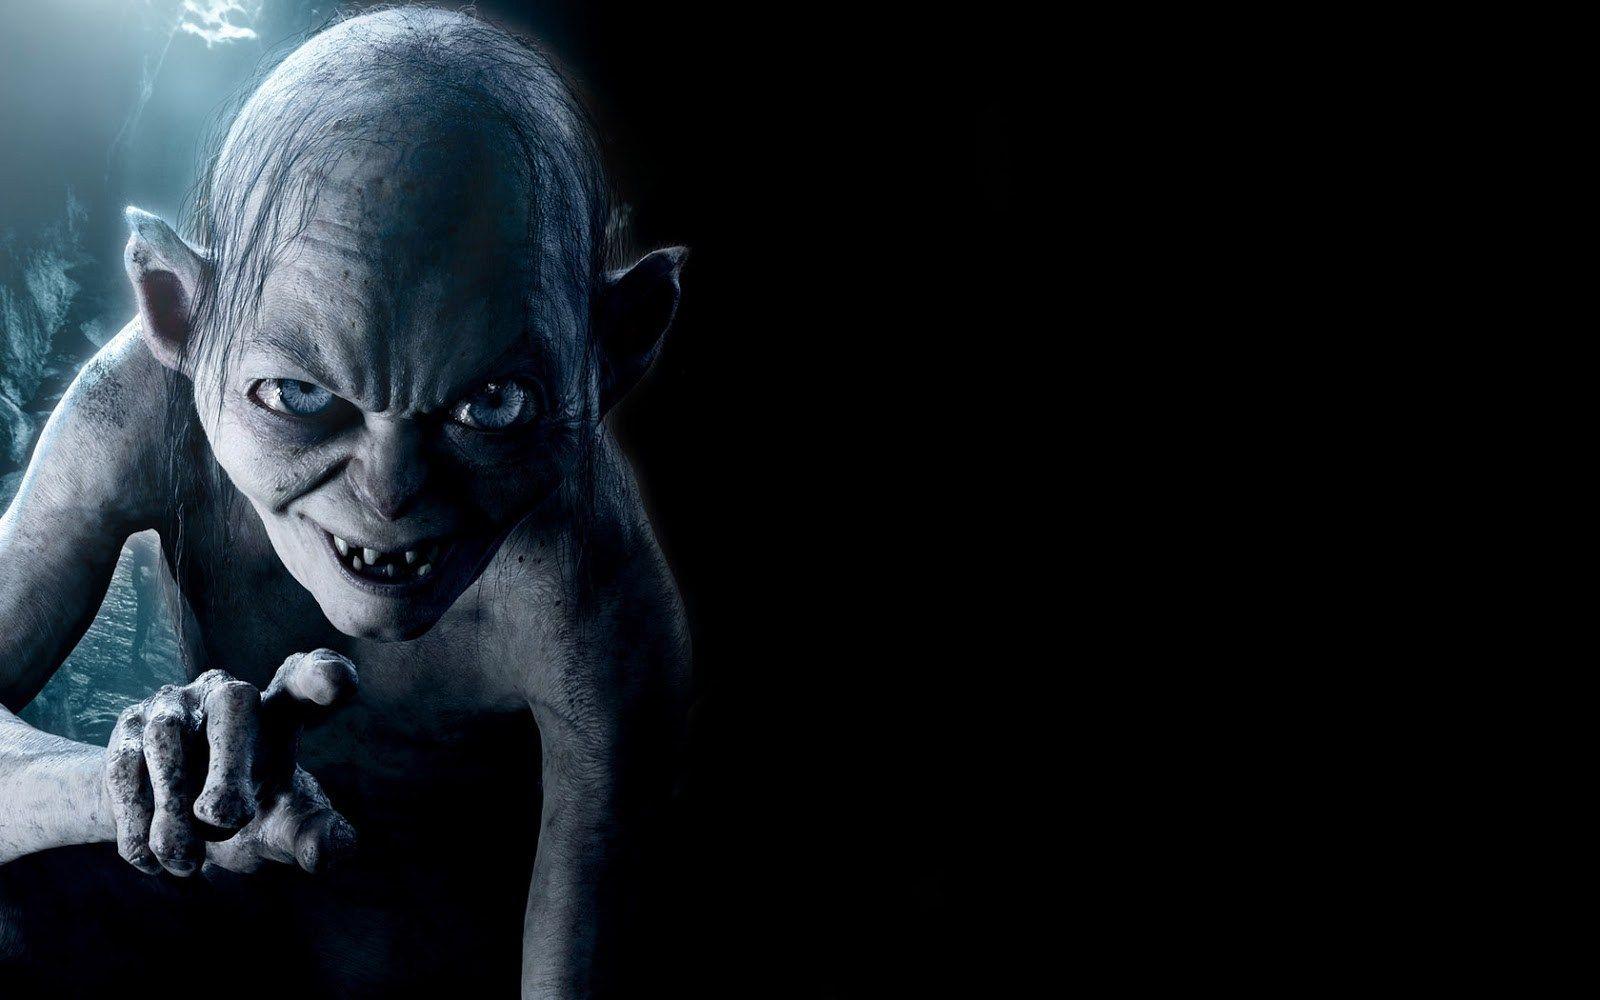 Amazing Gollum The Hobbit Wallpaper These are High Quality and High